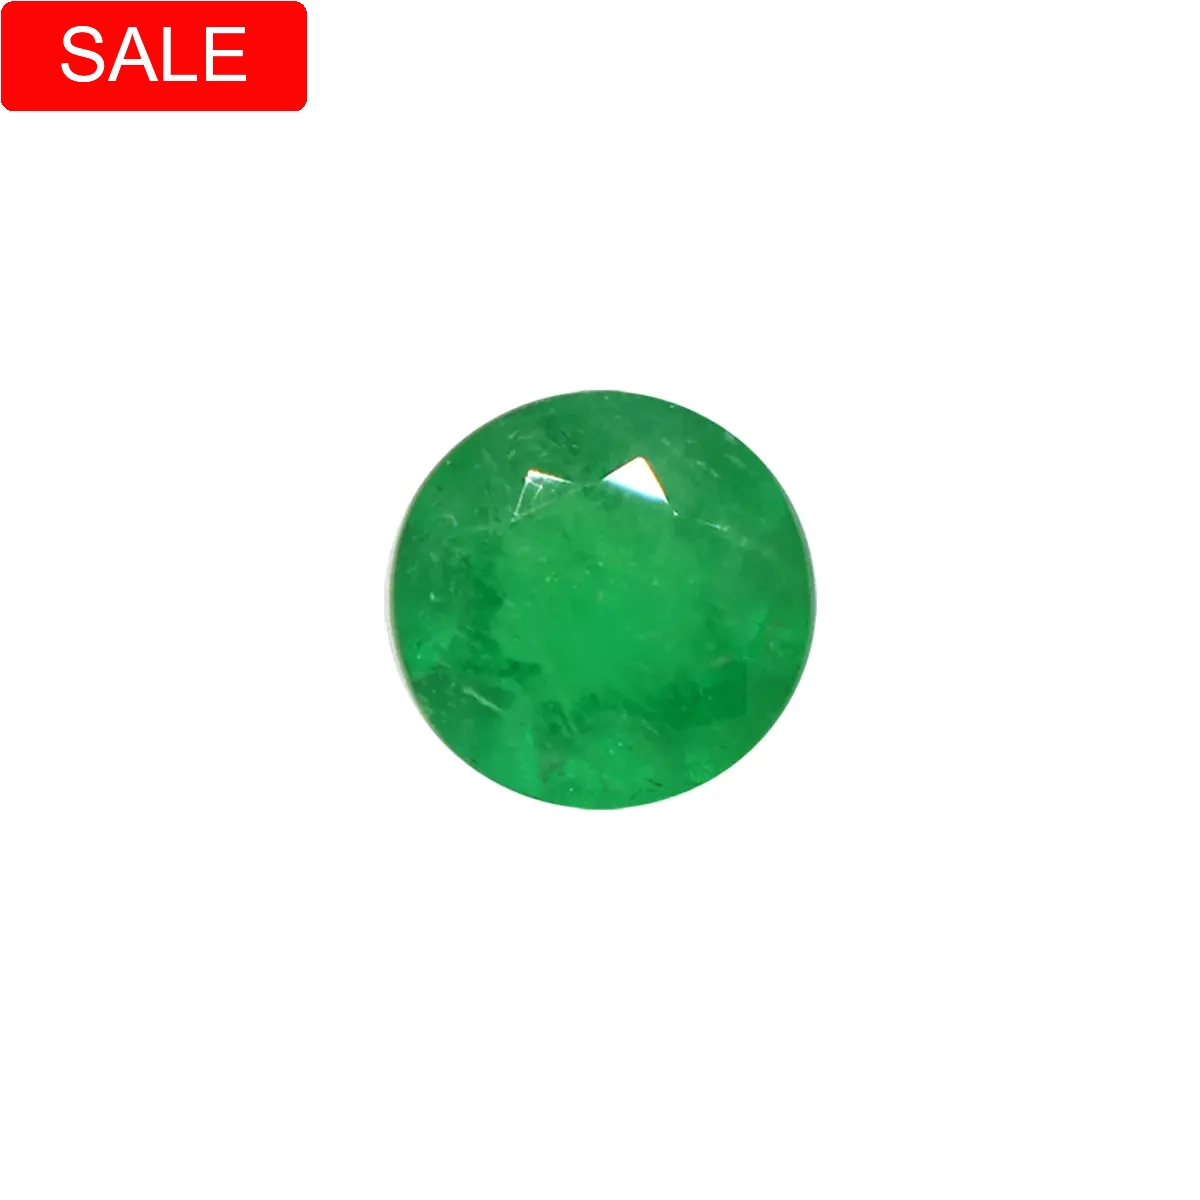 Round cut natural Colombian emerald in 1.27 Ct. weight